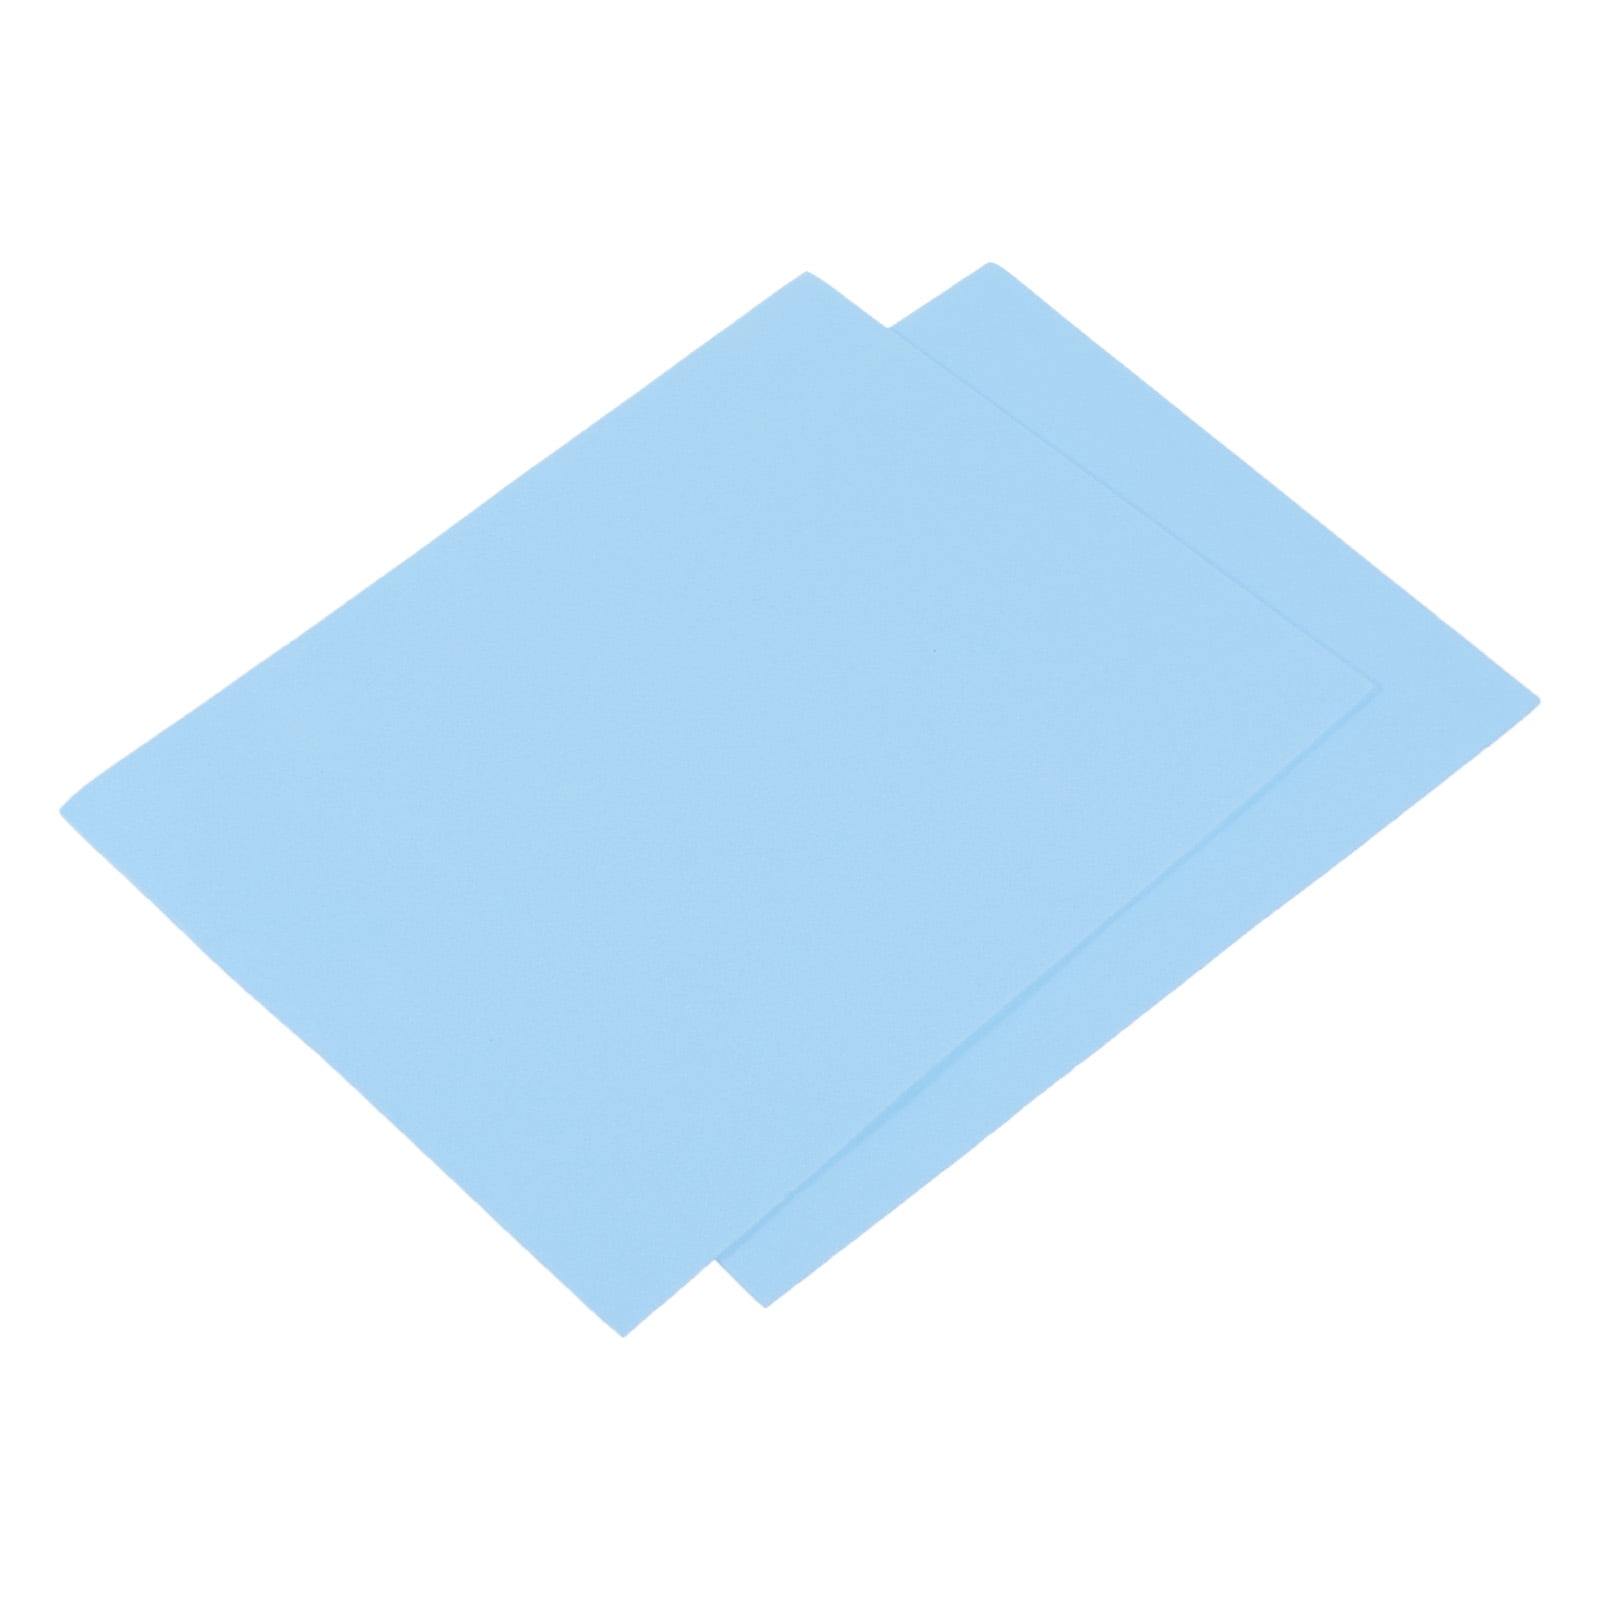  uxcell Blue EVA Foam Sheets 10 x 10 Inch 5mm Thickness